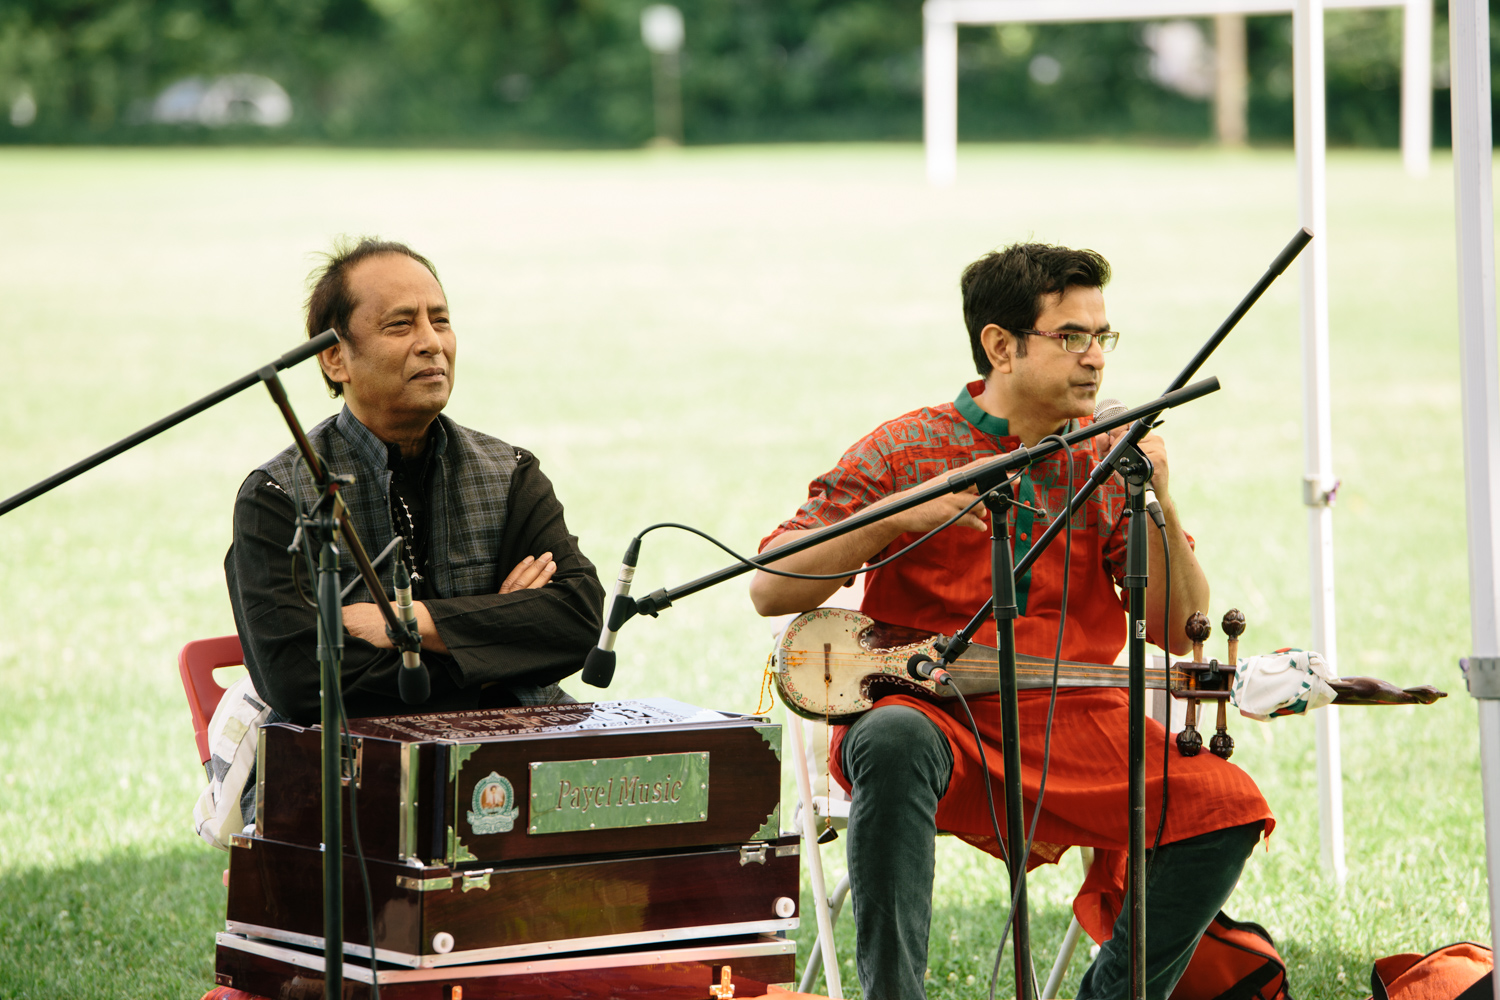 Two men perform different instruments under a tent in a field.